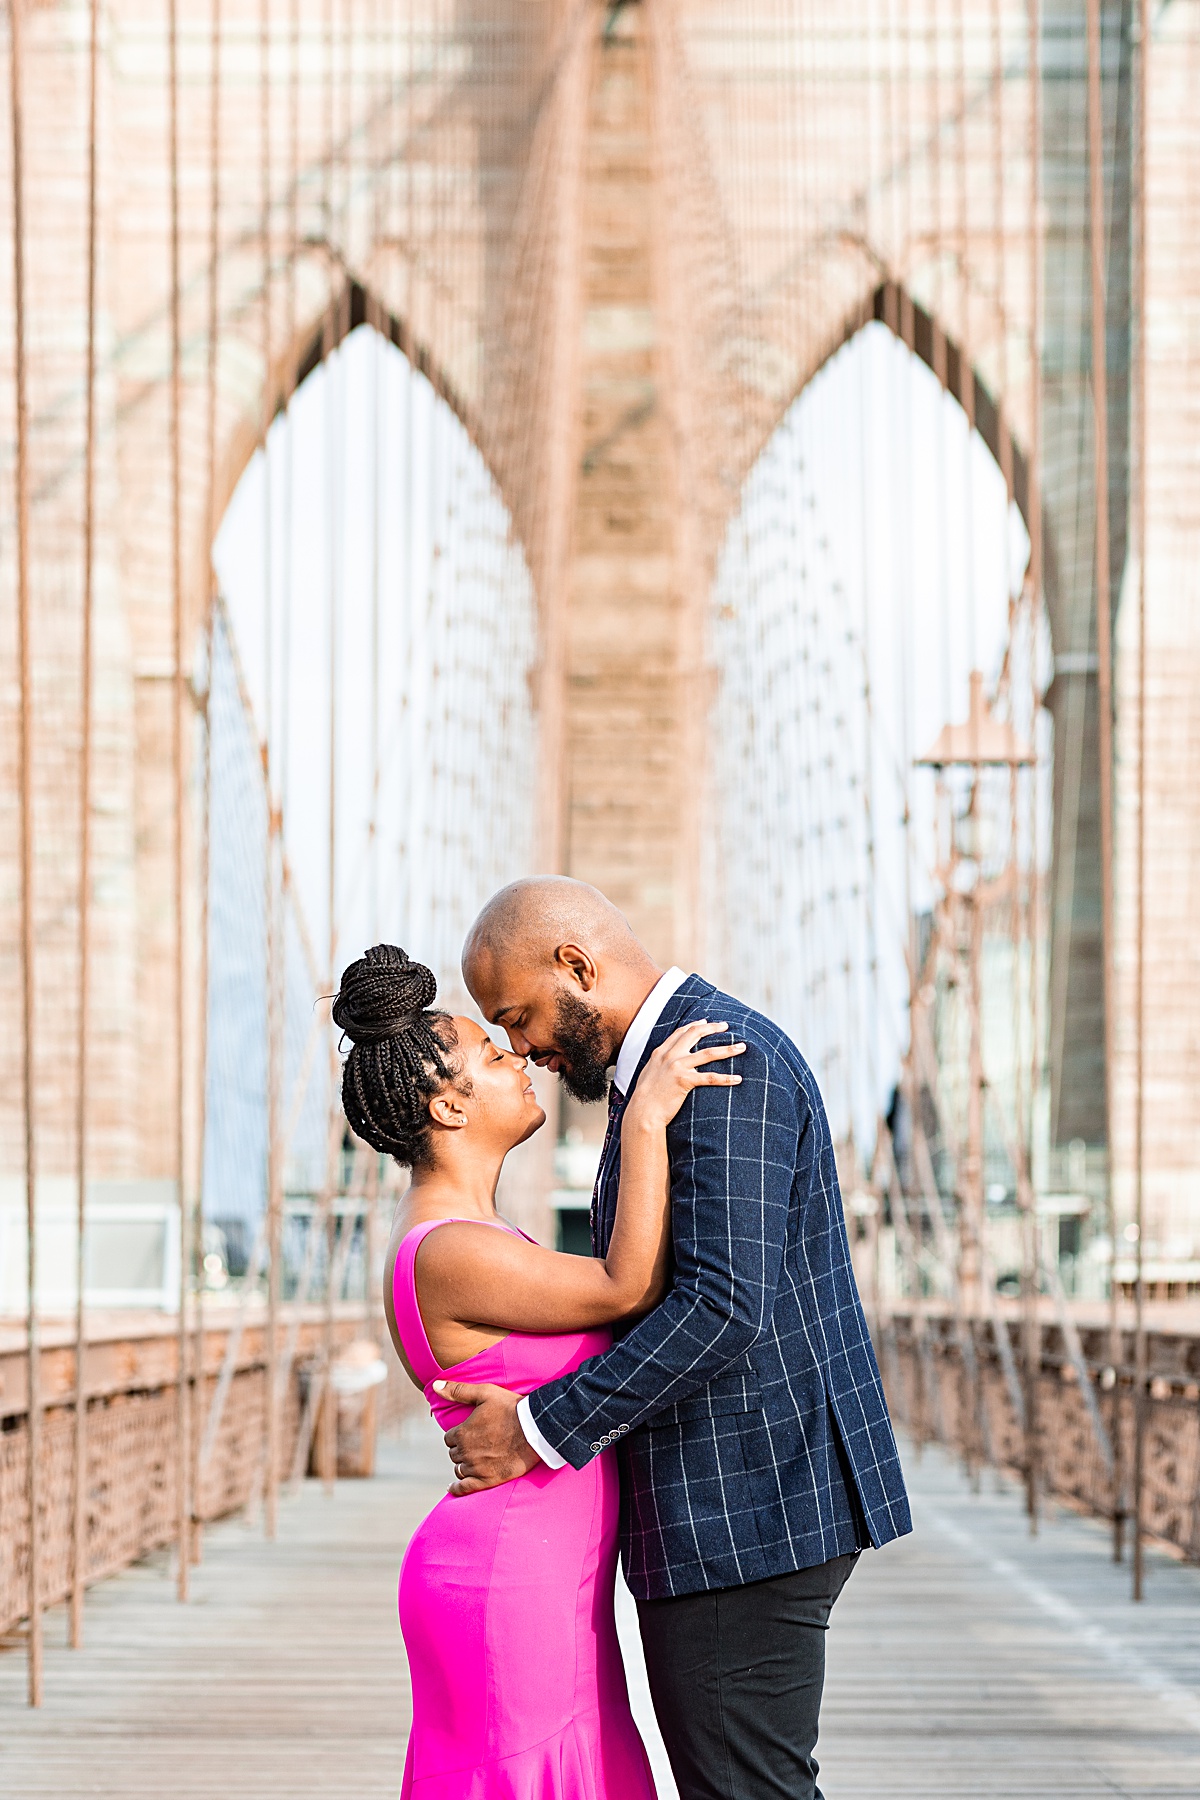 Destination engagement session at the Brooklyn Bridge and Domino Park in New York City.